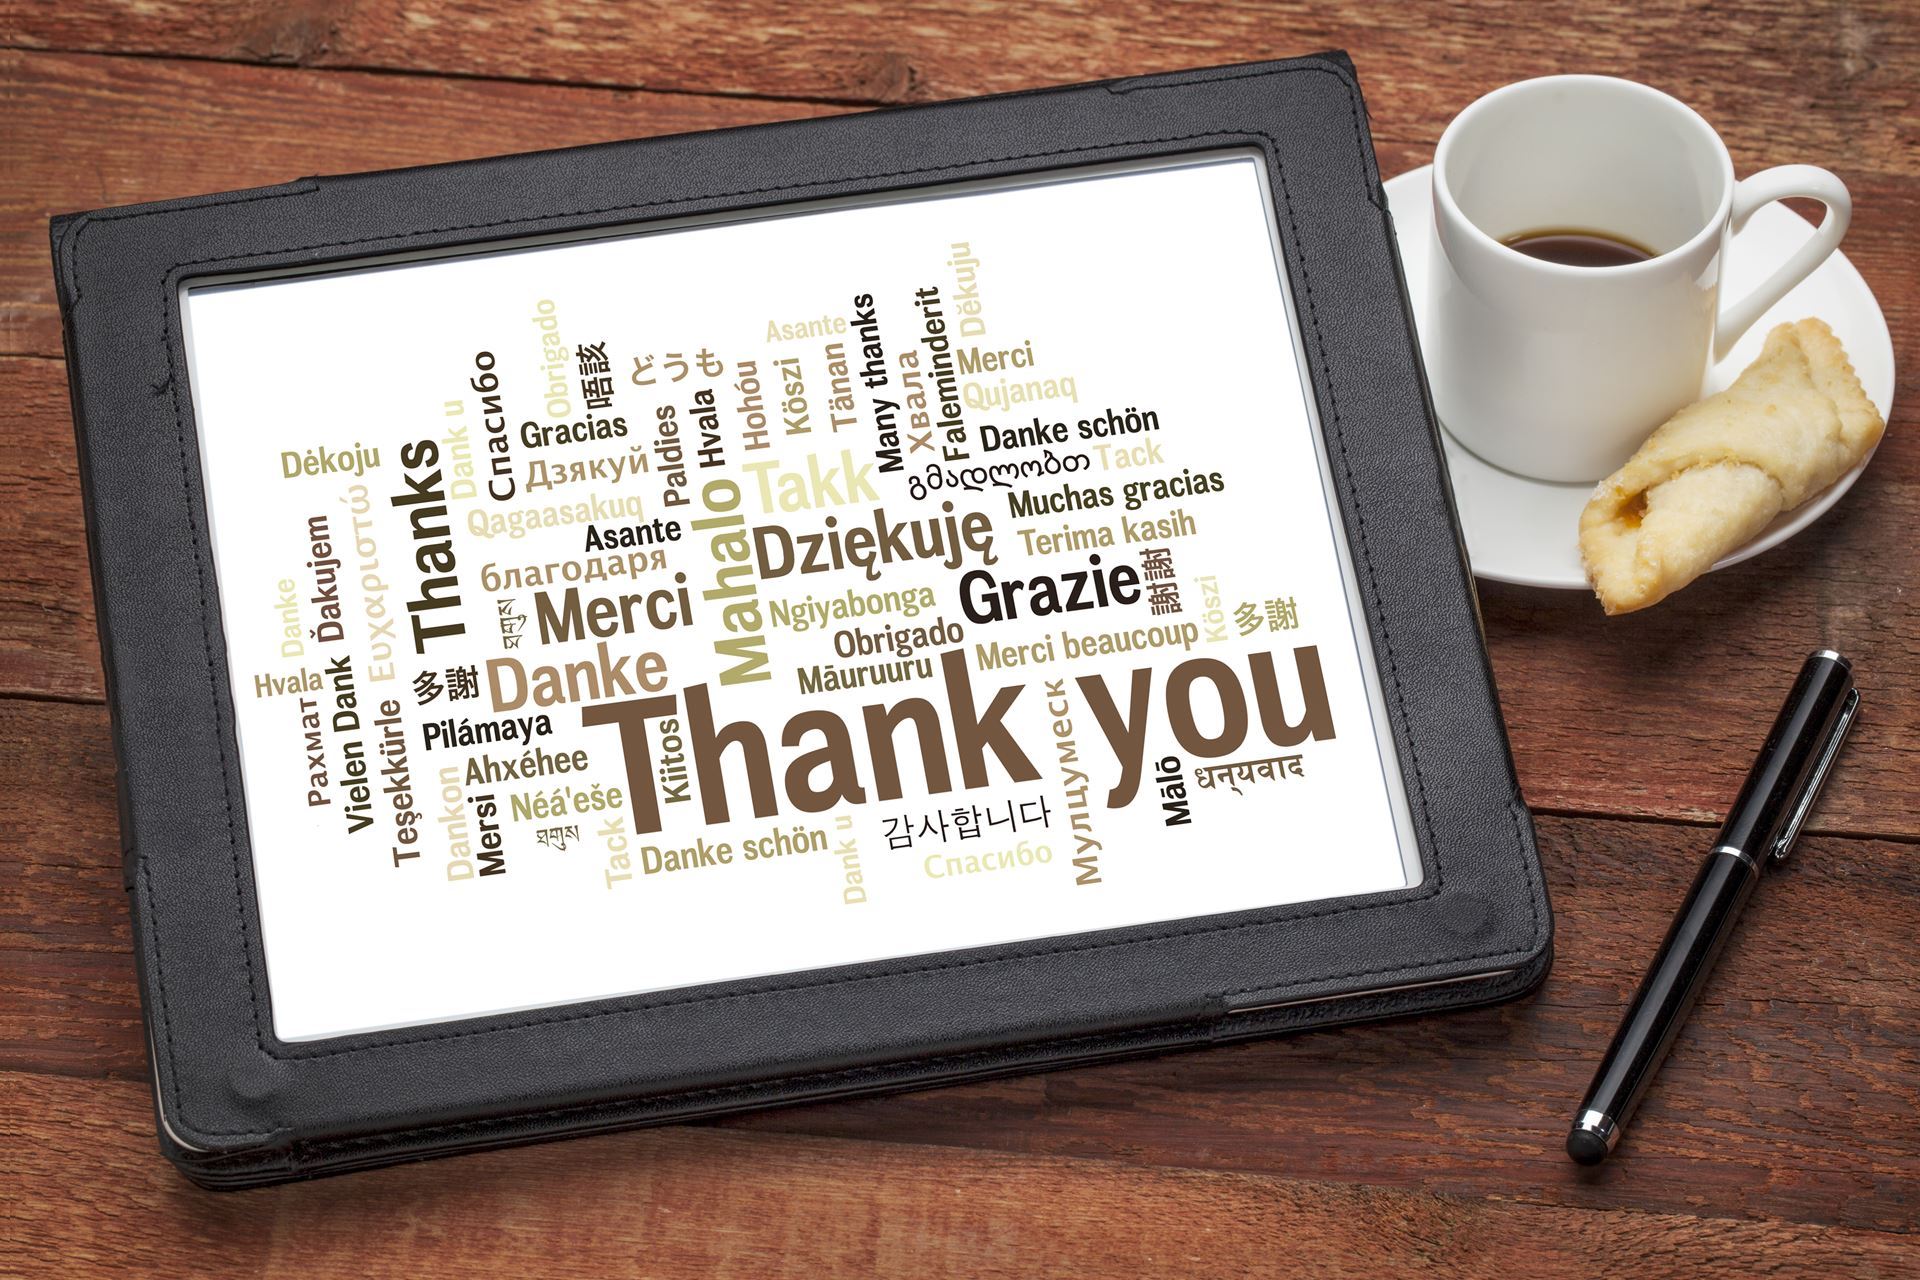 Thank you in many languages on a tablet with a cup of coffee, pastry, and a pen. 